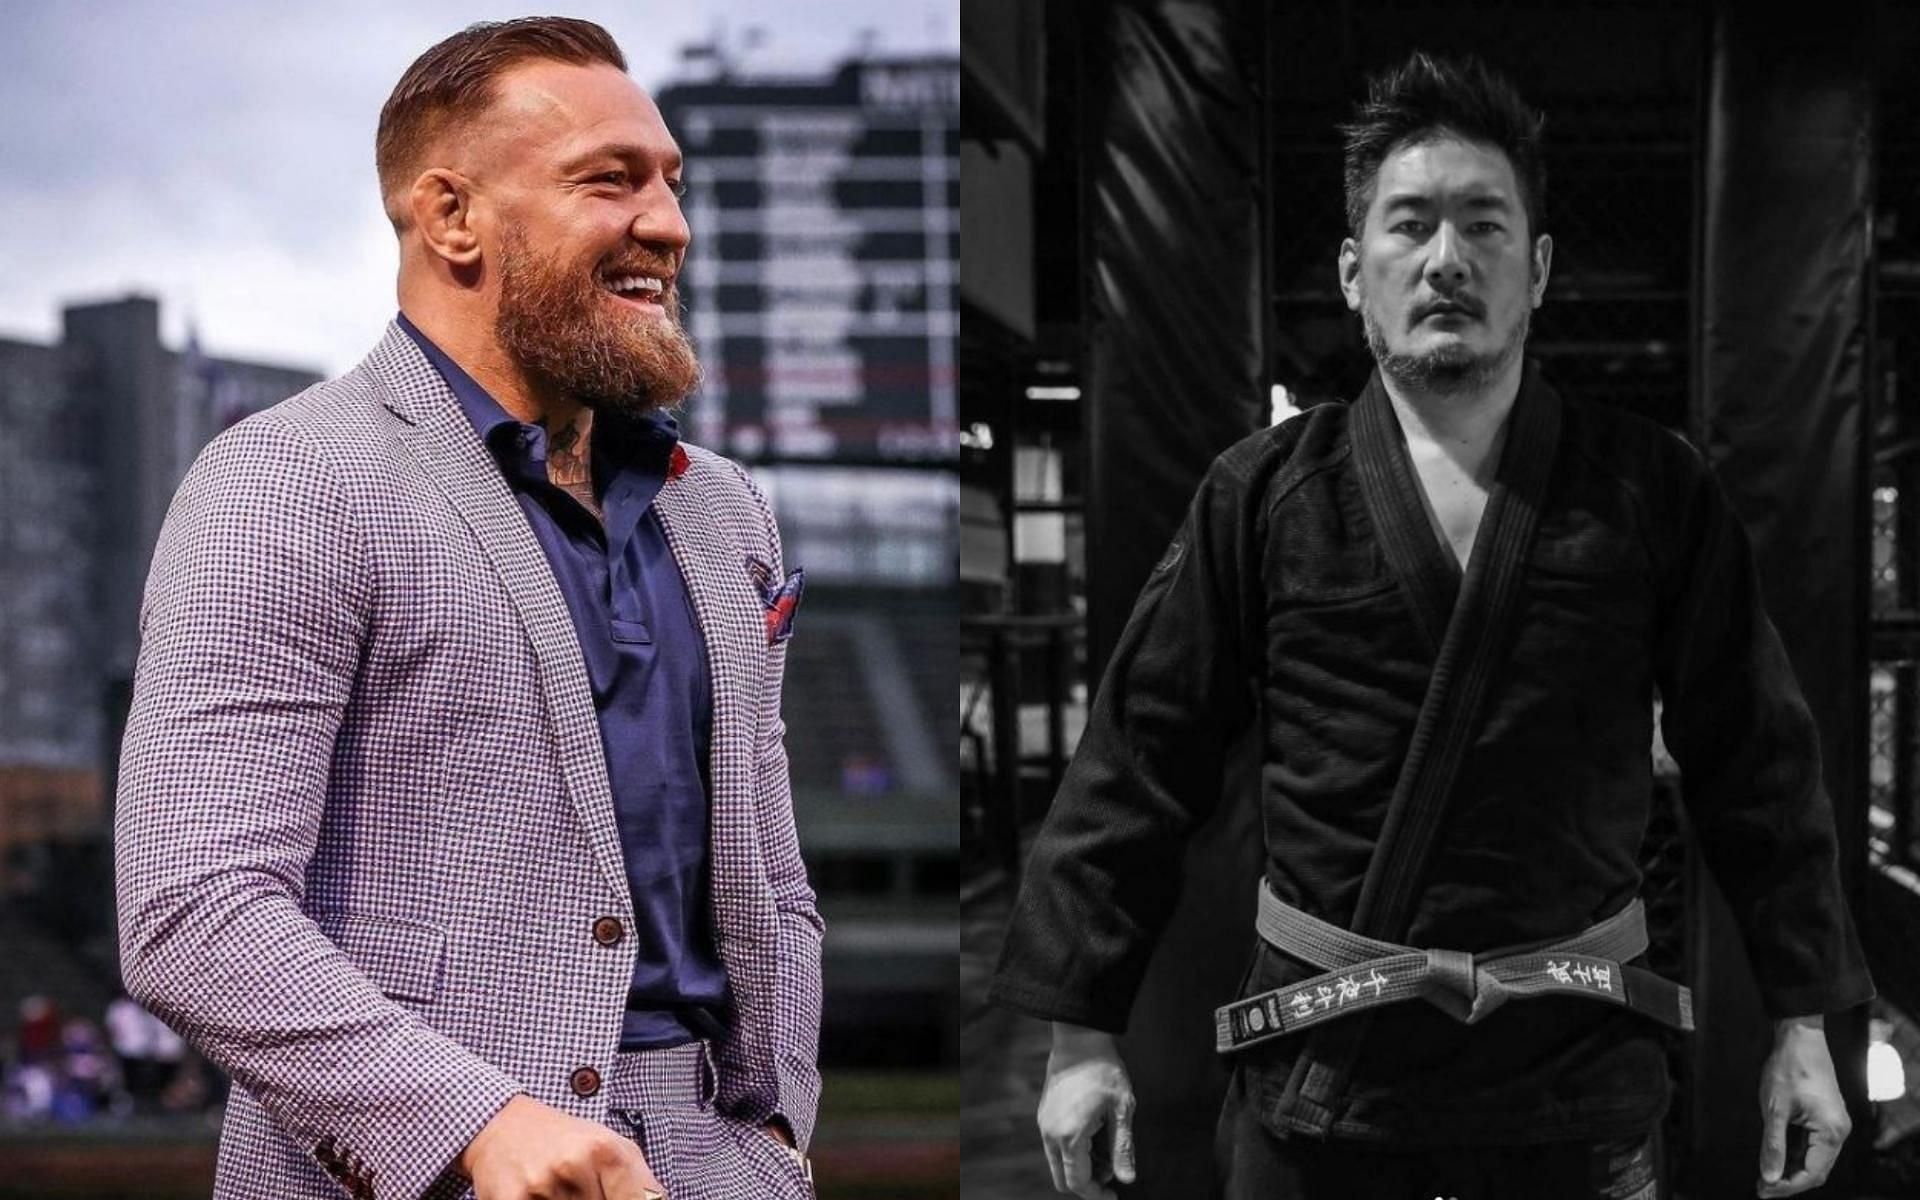 Back in 2018, Conor Mcgregor (left) called out ONE CEO Chatri Sityodtong (right) in a scathing tweet about the UFC&#039;s flyweight division. (Images courtesy: @thenotoriousmma and @yodchatri on Instagram)